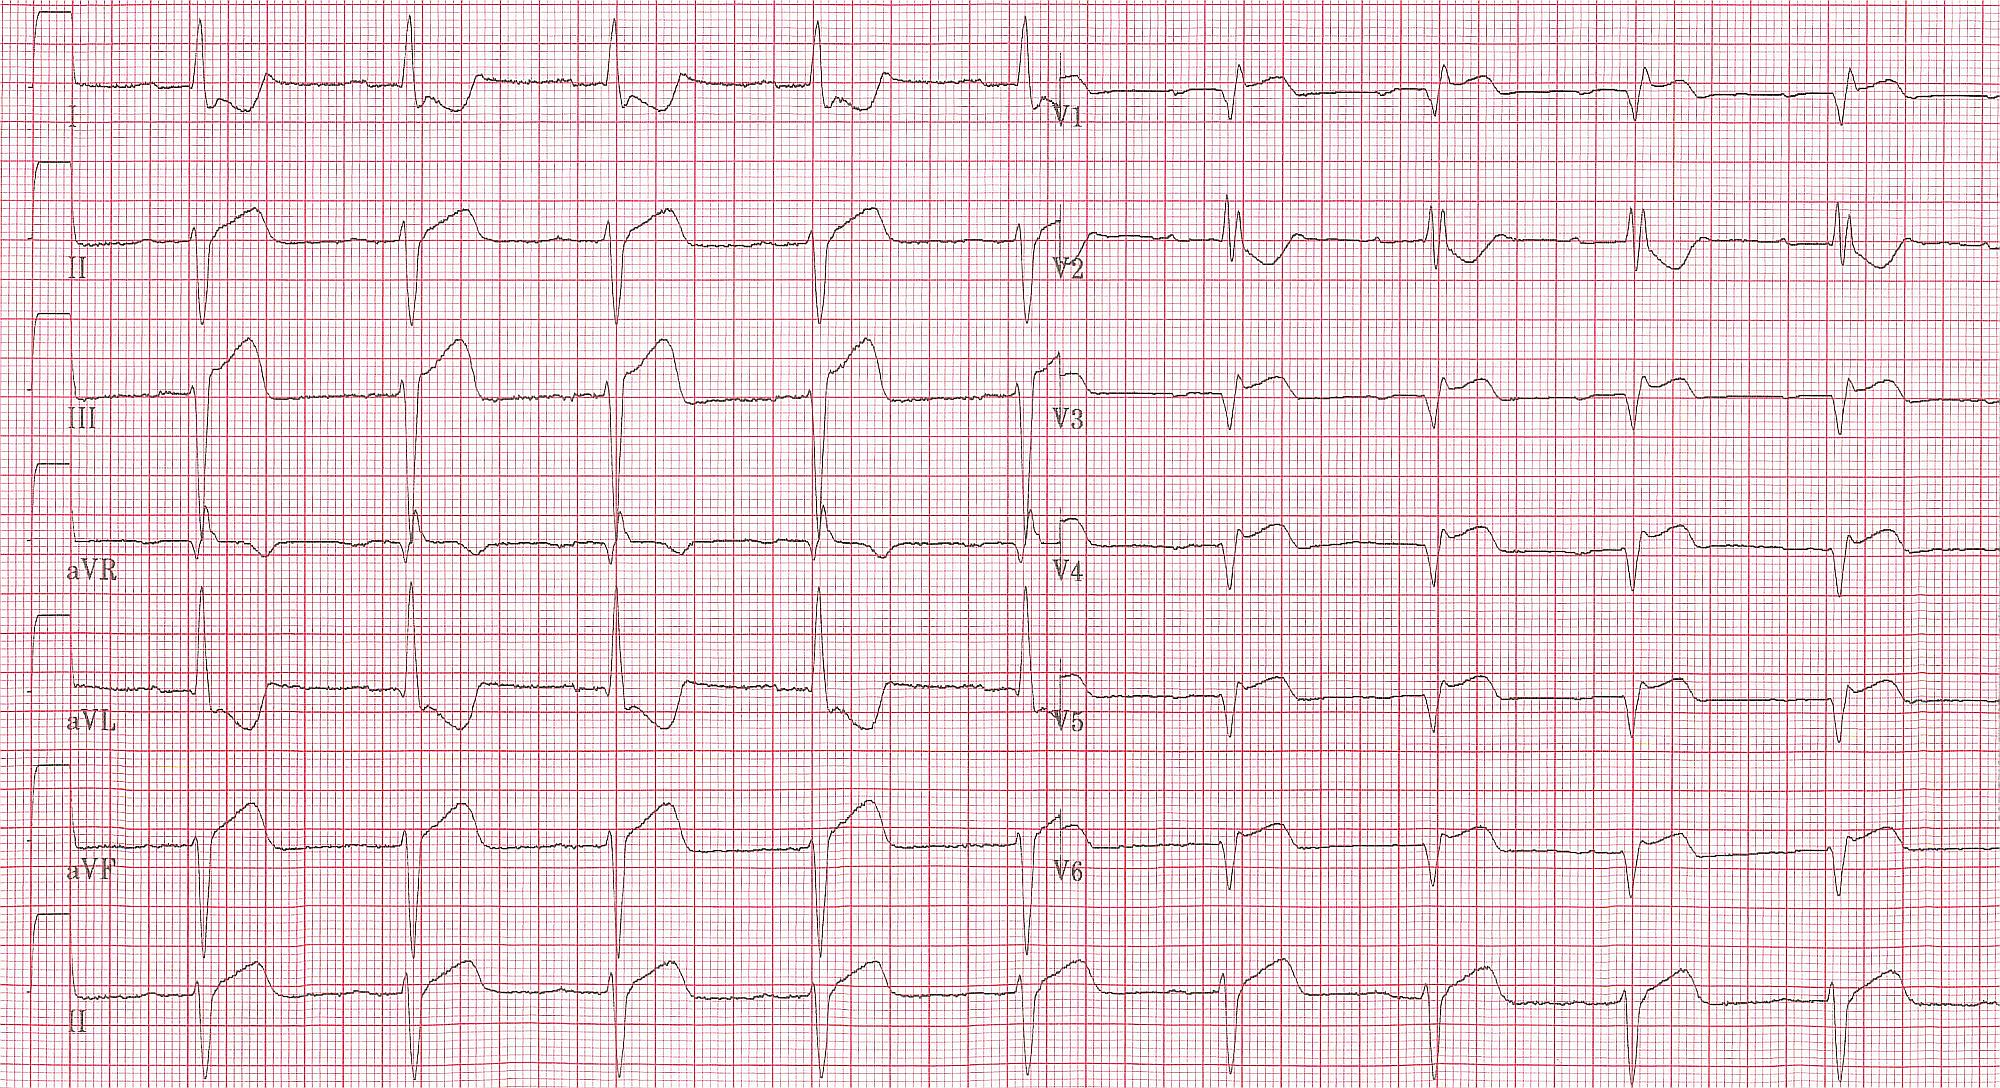 Lead V4R in the same patient with RBBB and inferior MI clearly shows ST elevation.